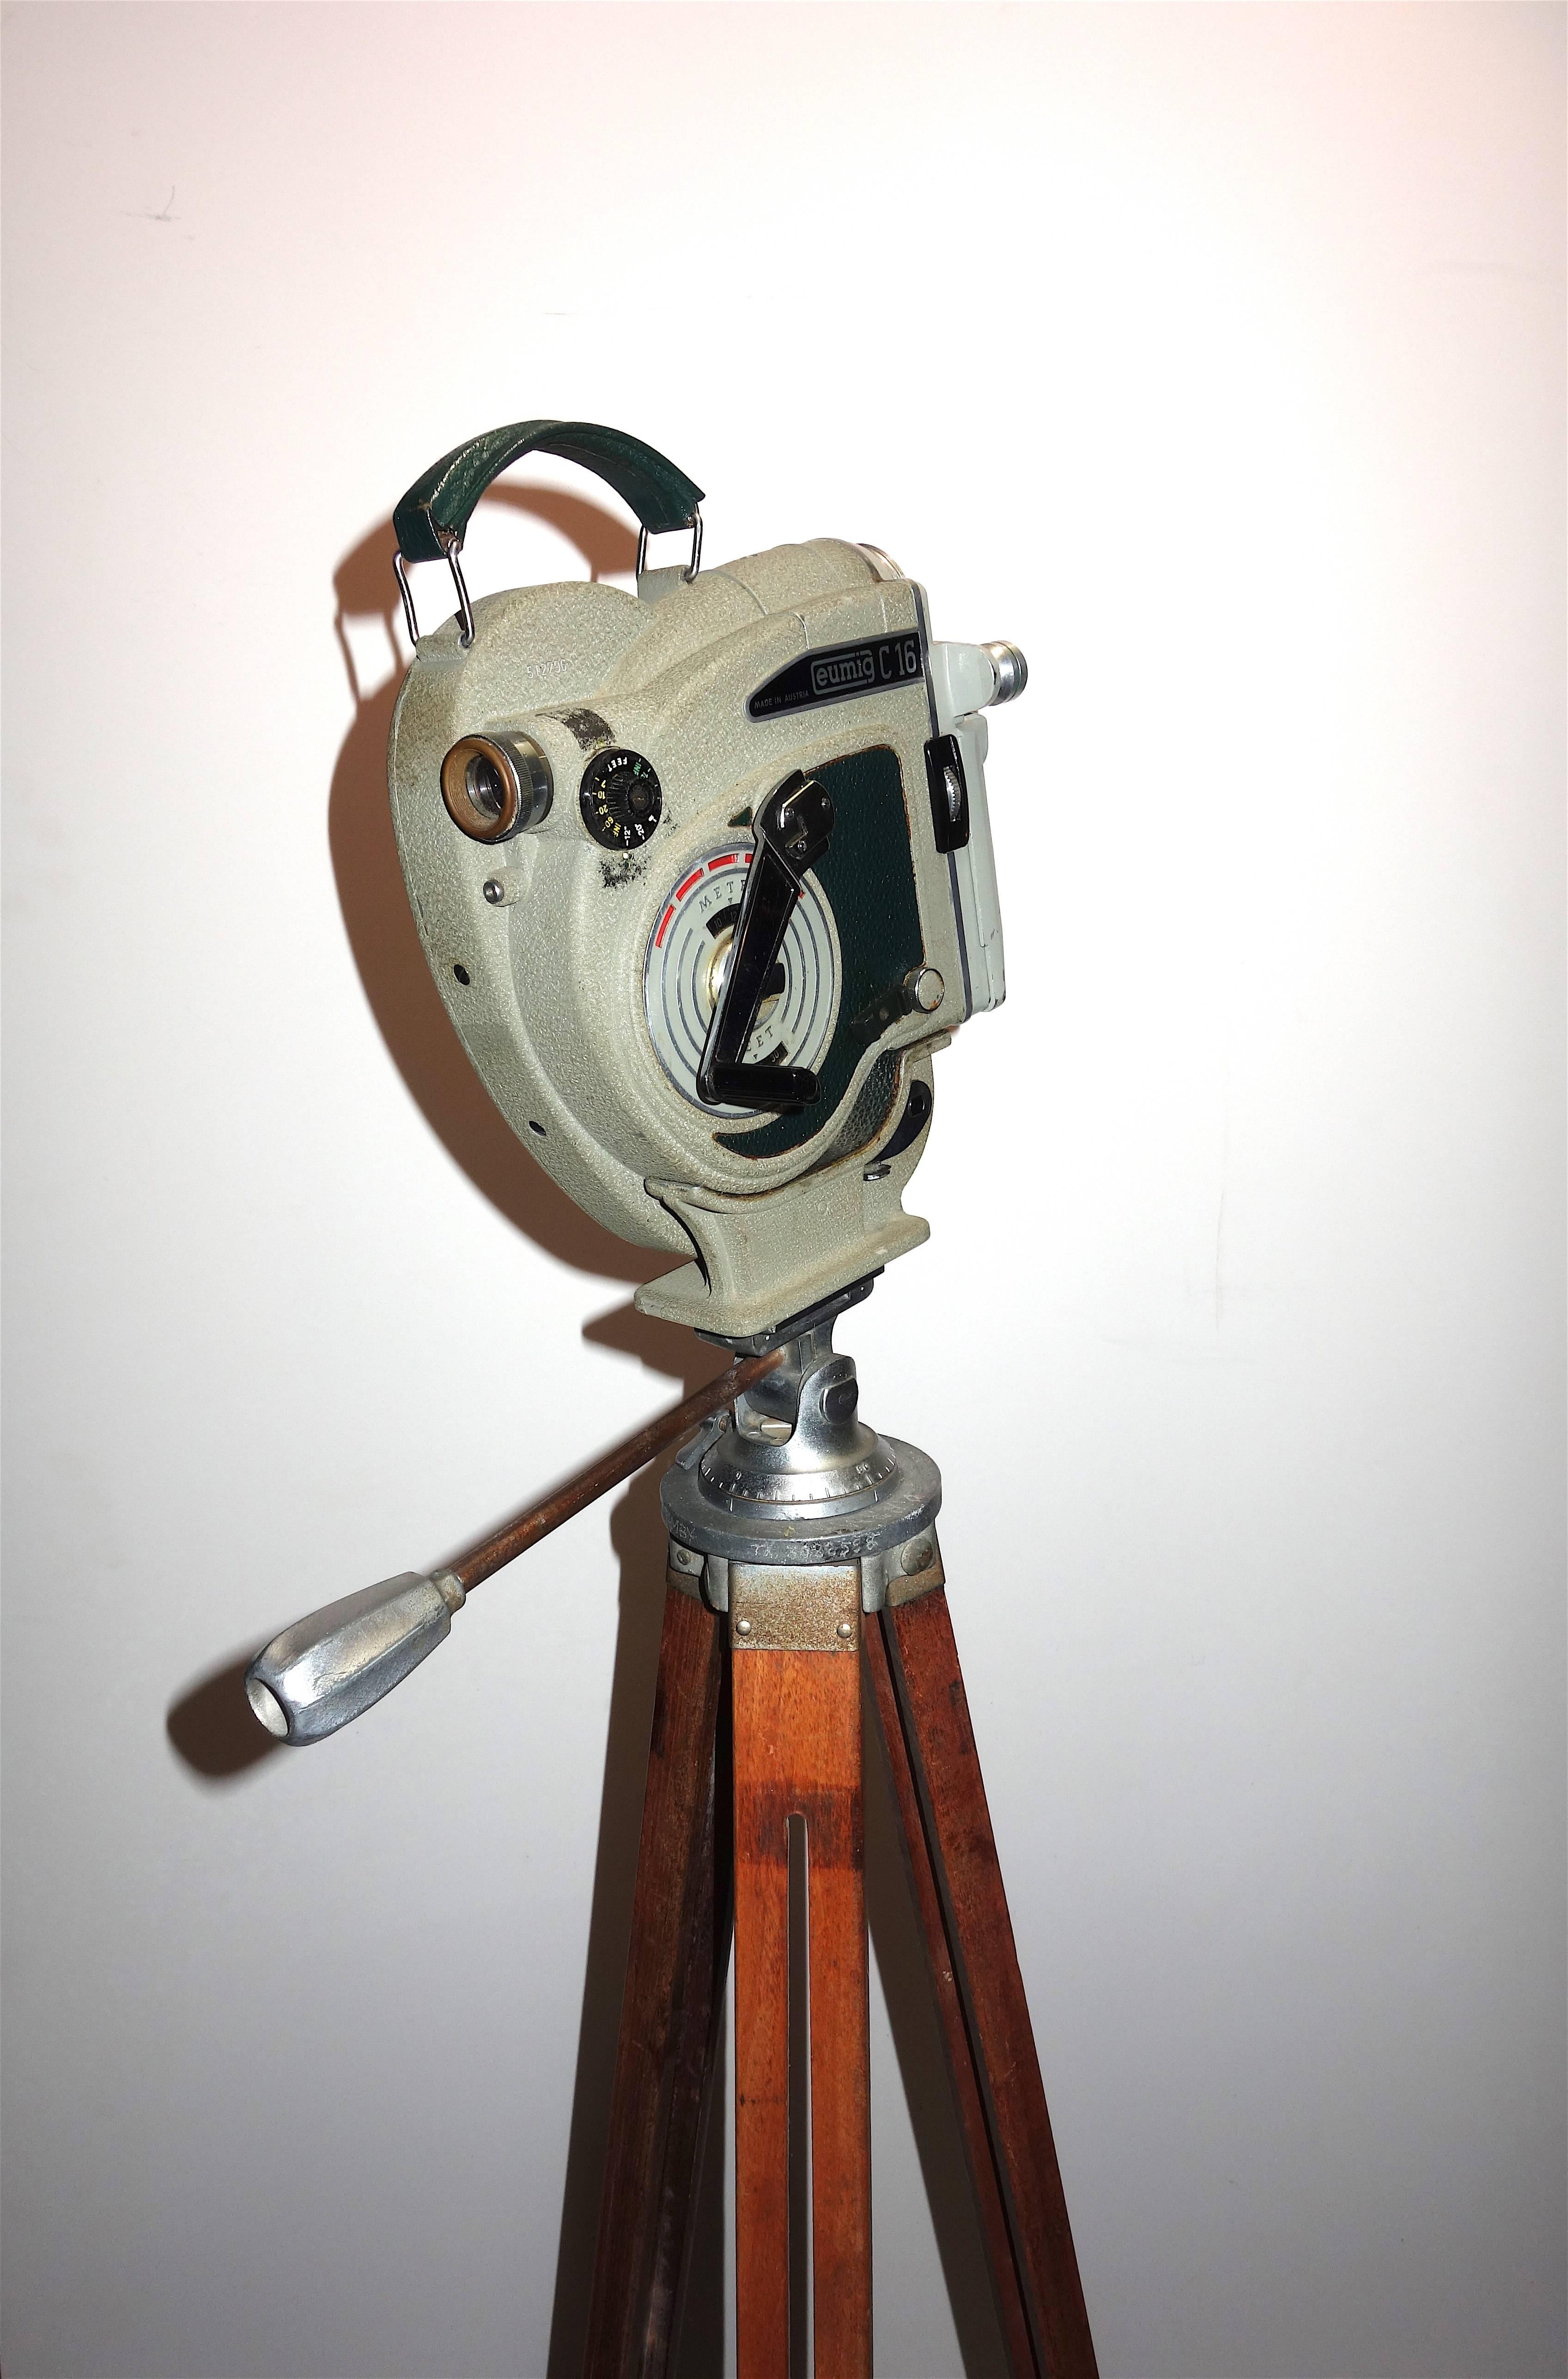 Art Deco Austrian Motion Picture Camera circa 1956 on Wood Tripod Vintage Perfect Display For Sale